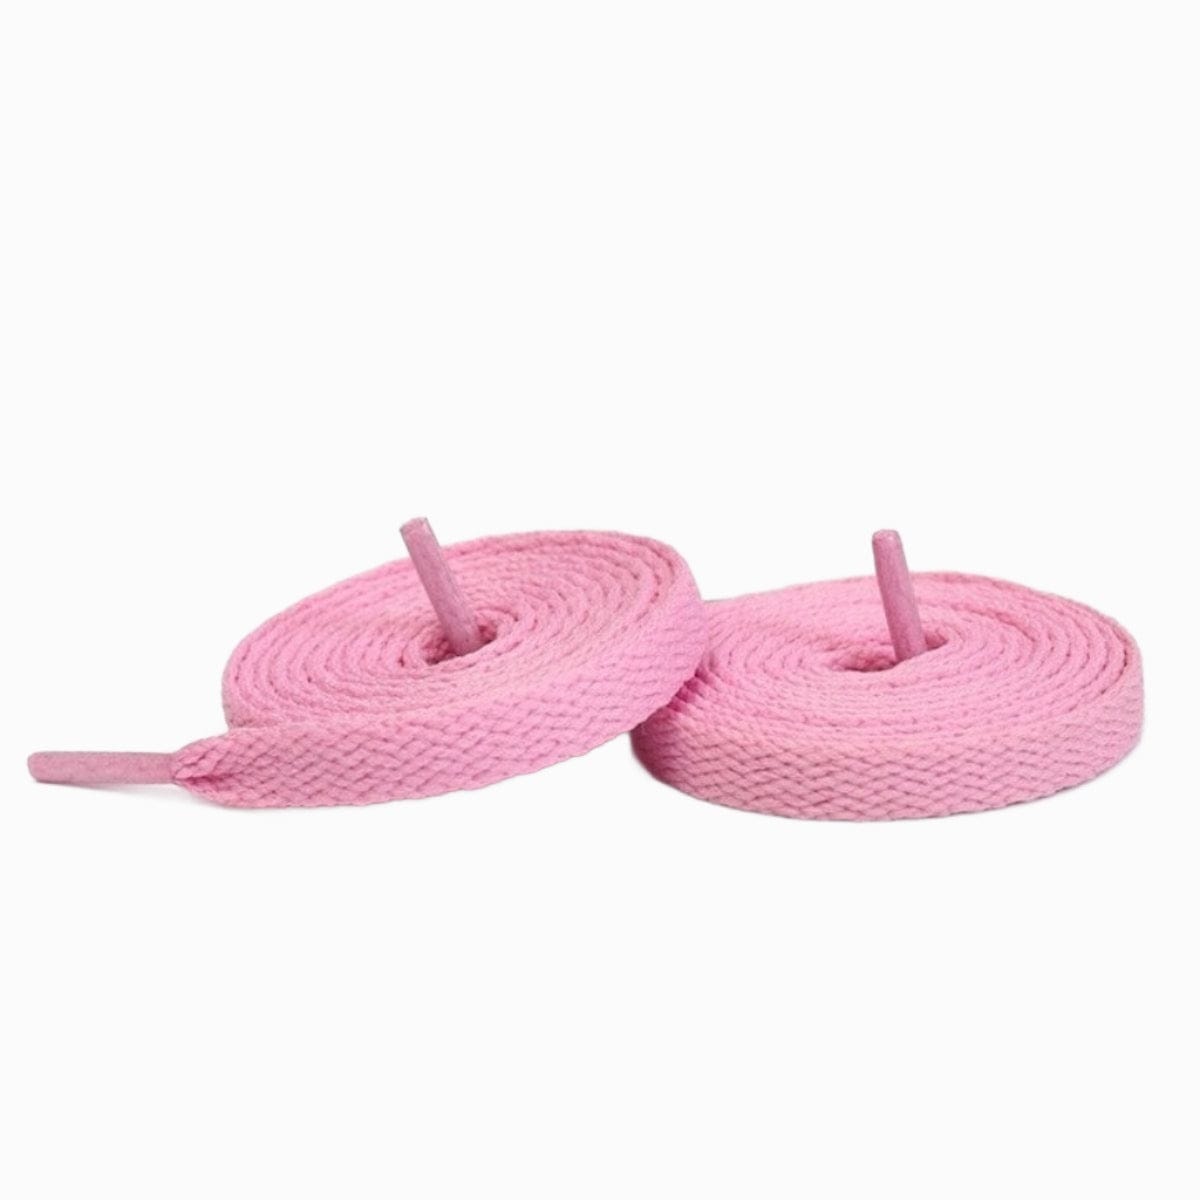 Pink Replacement Converse Laces for Converse Pro Blaze Sneakers by Kicks Shoelaces